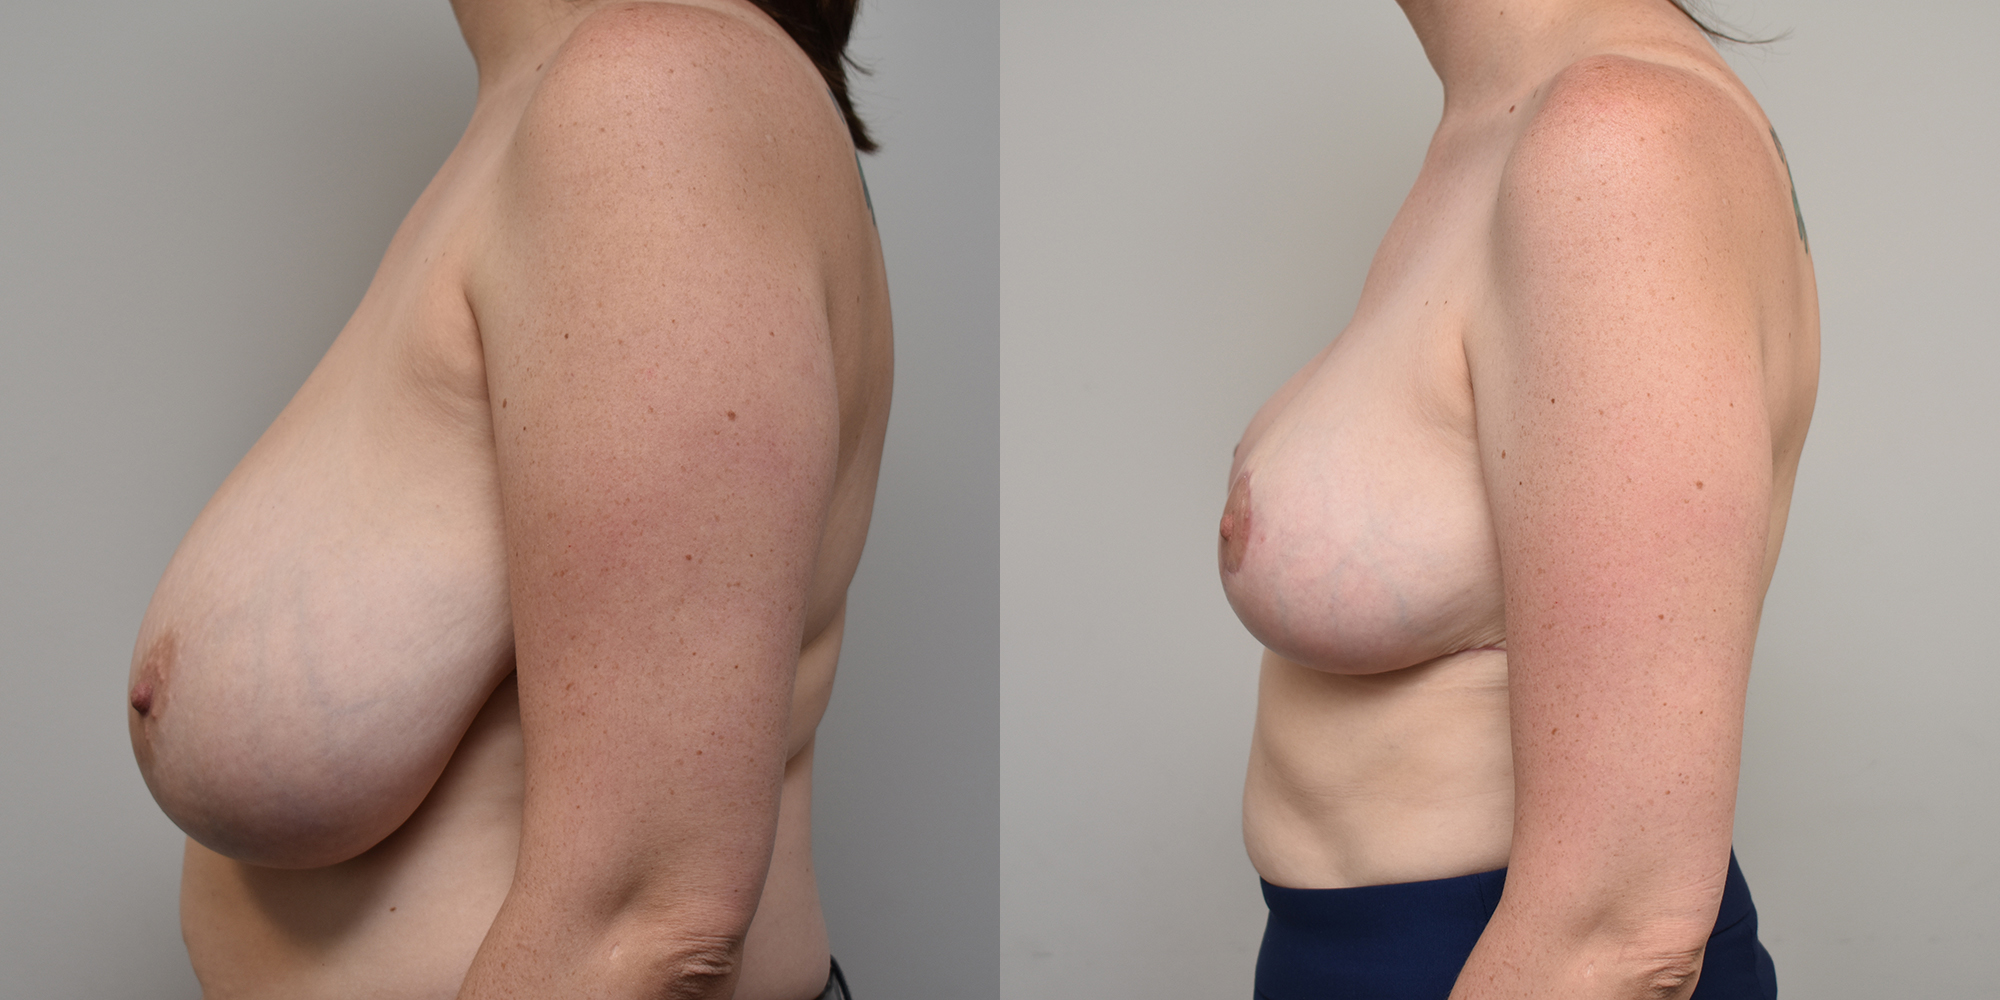 Breast Lift Before and After photo by Susan Gannon, MD of The Plastic Surgery Group in Albany, NY